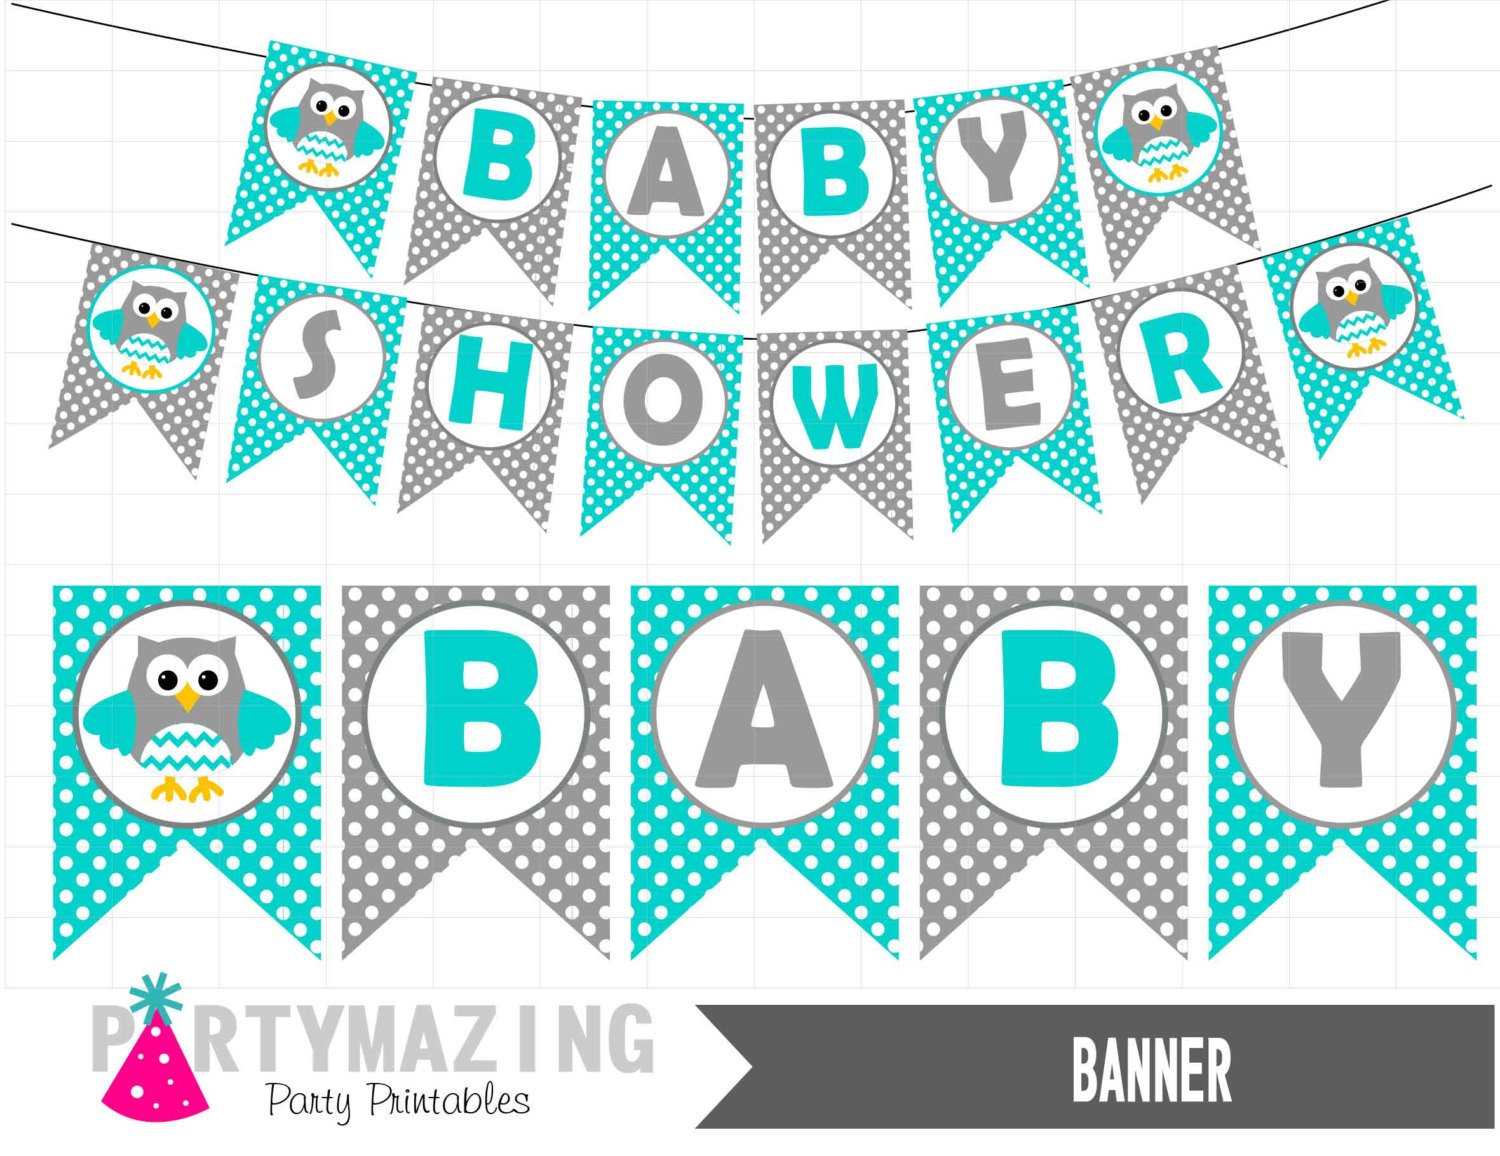 Baby Shower Banners DIY
 Owl Baby Shower Party Banner DIY Printable Turquoise Blue